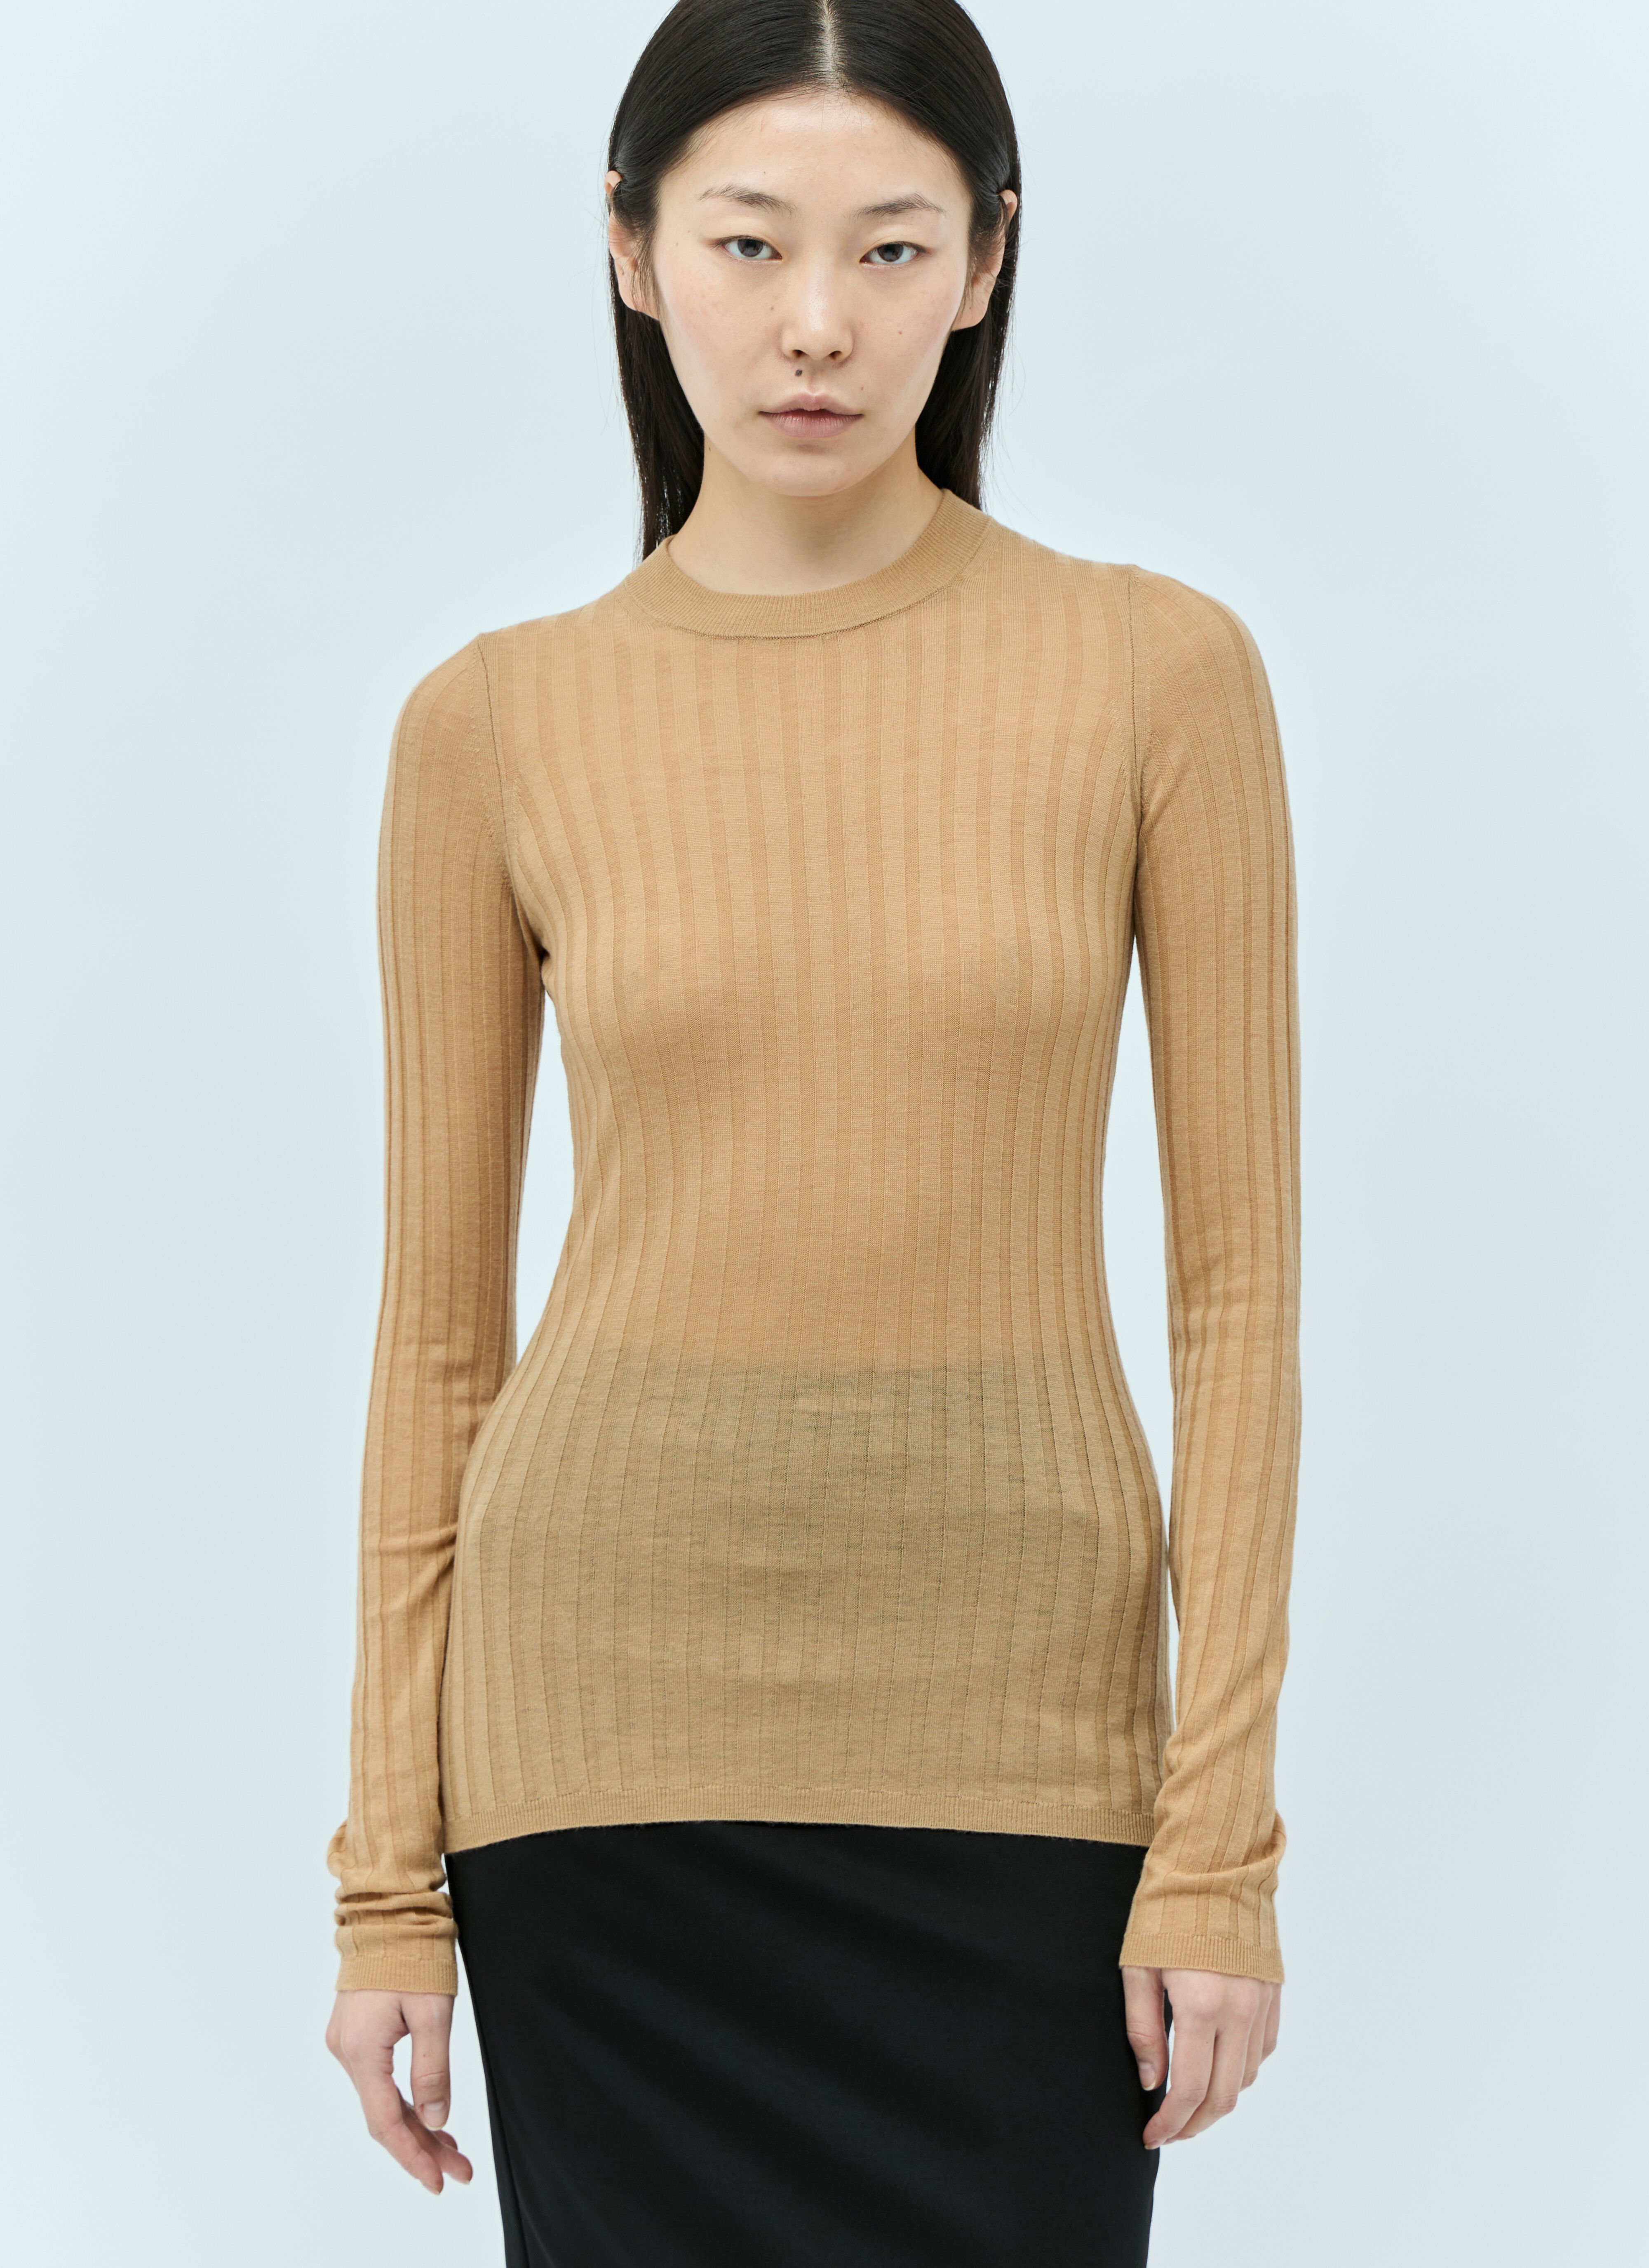 Burberry Ribbed Wool Sweater Red bur0254010